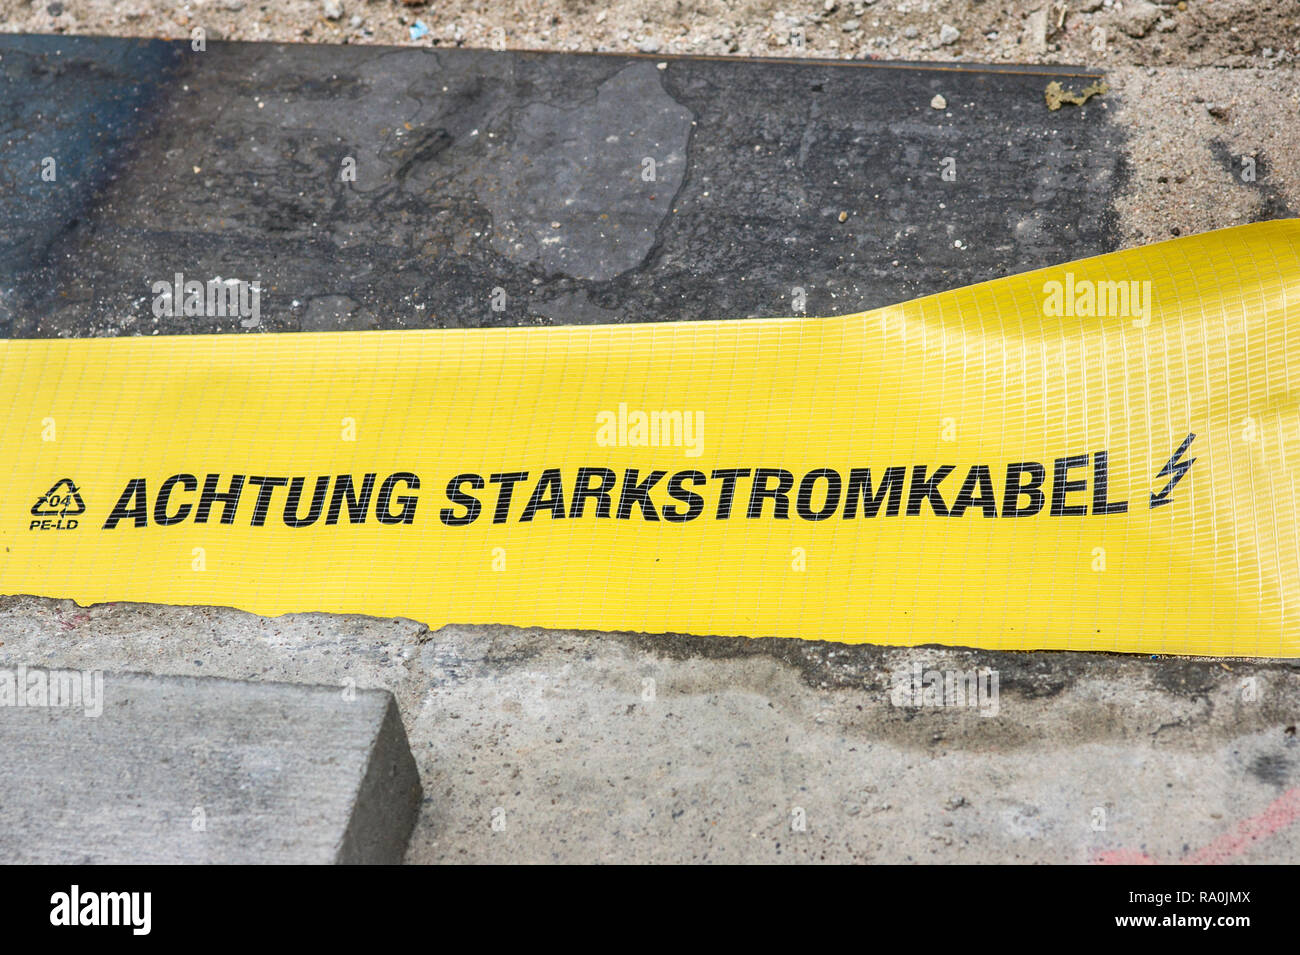 achtung starkstromkabel ;  attention, high voltage power cable  Stock Photo